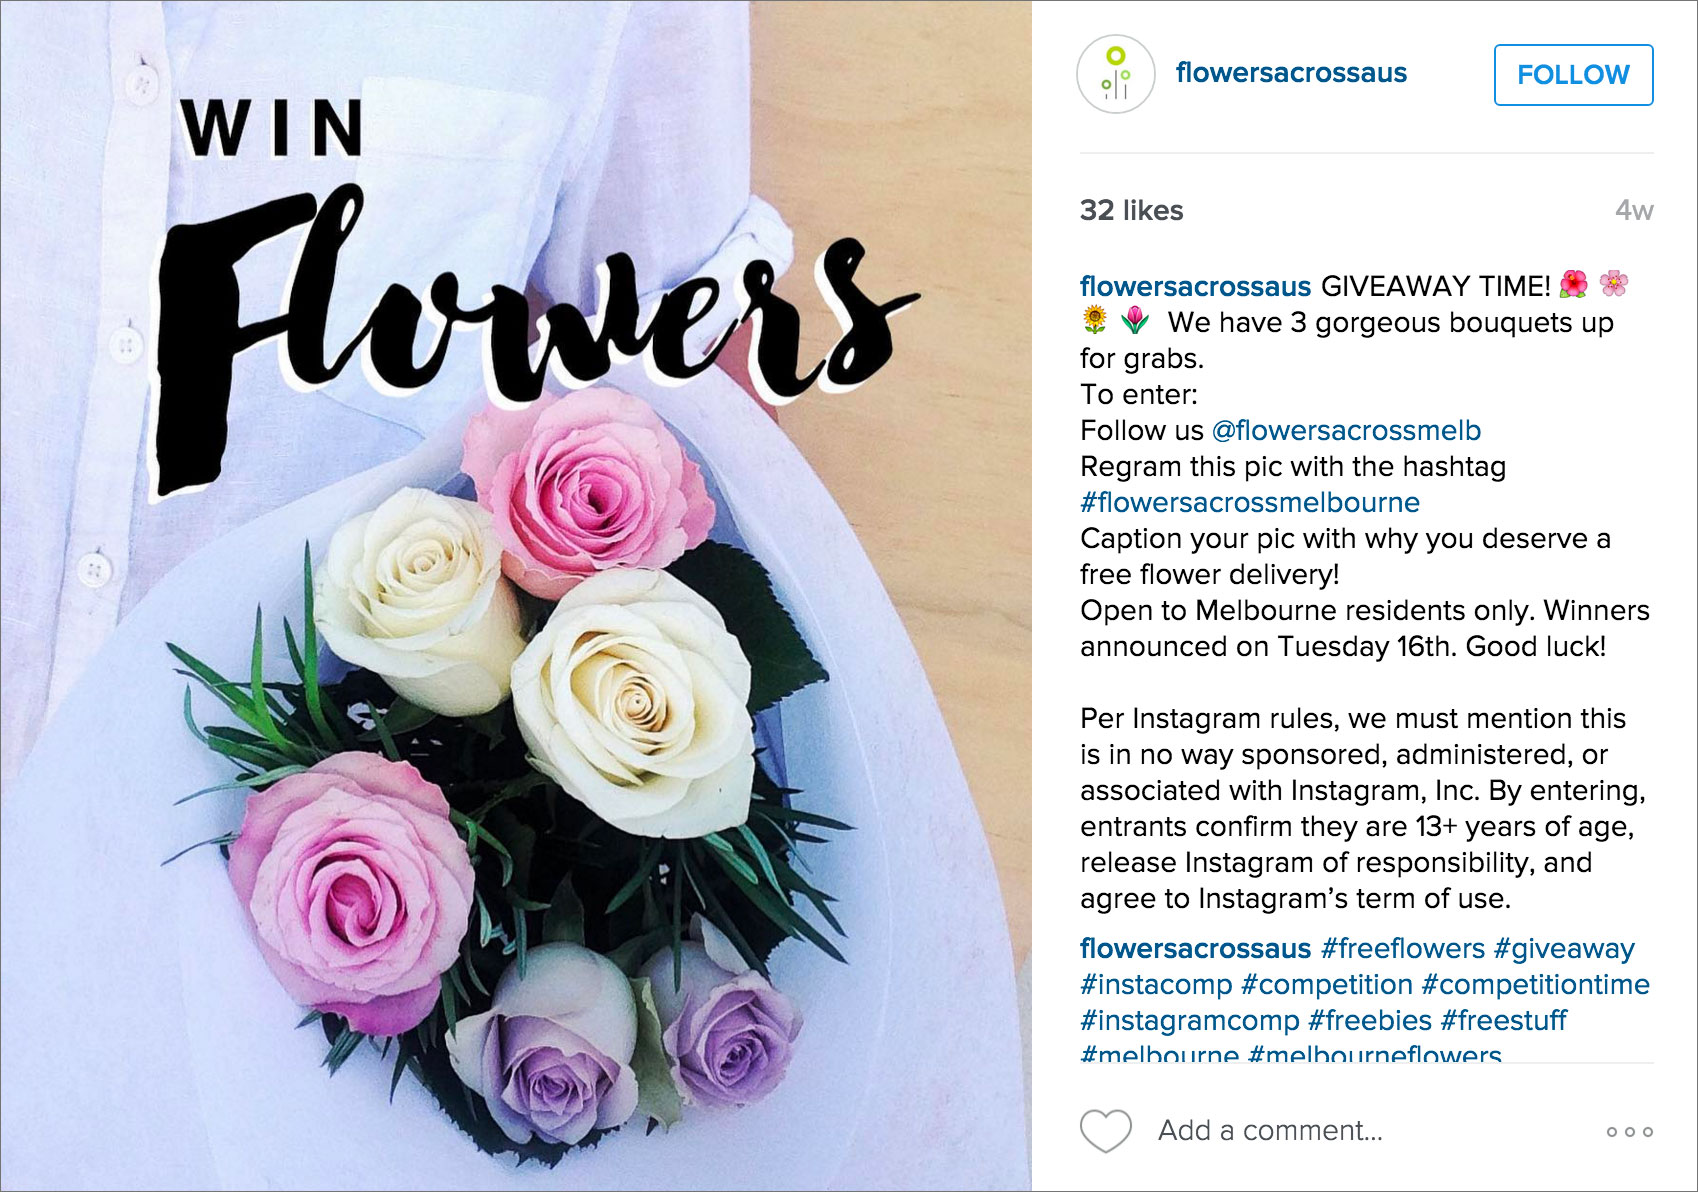 How to Run an Instagram Competition or Giveaway